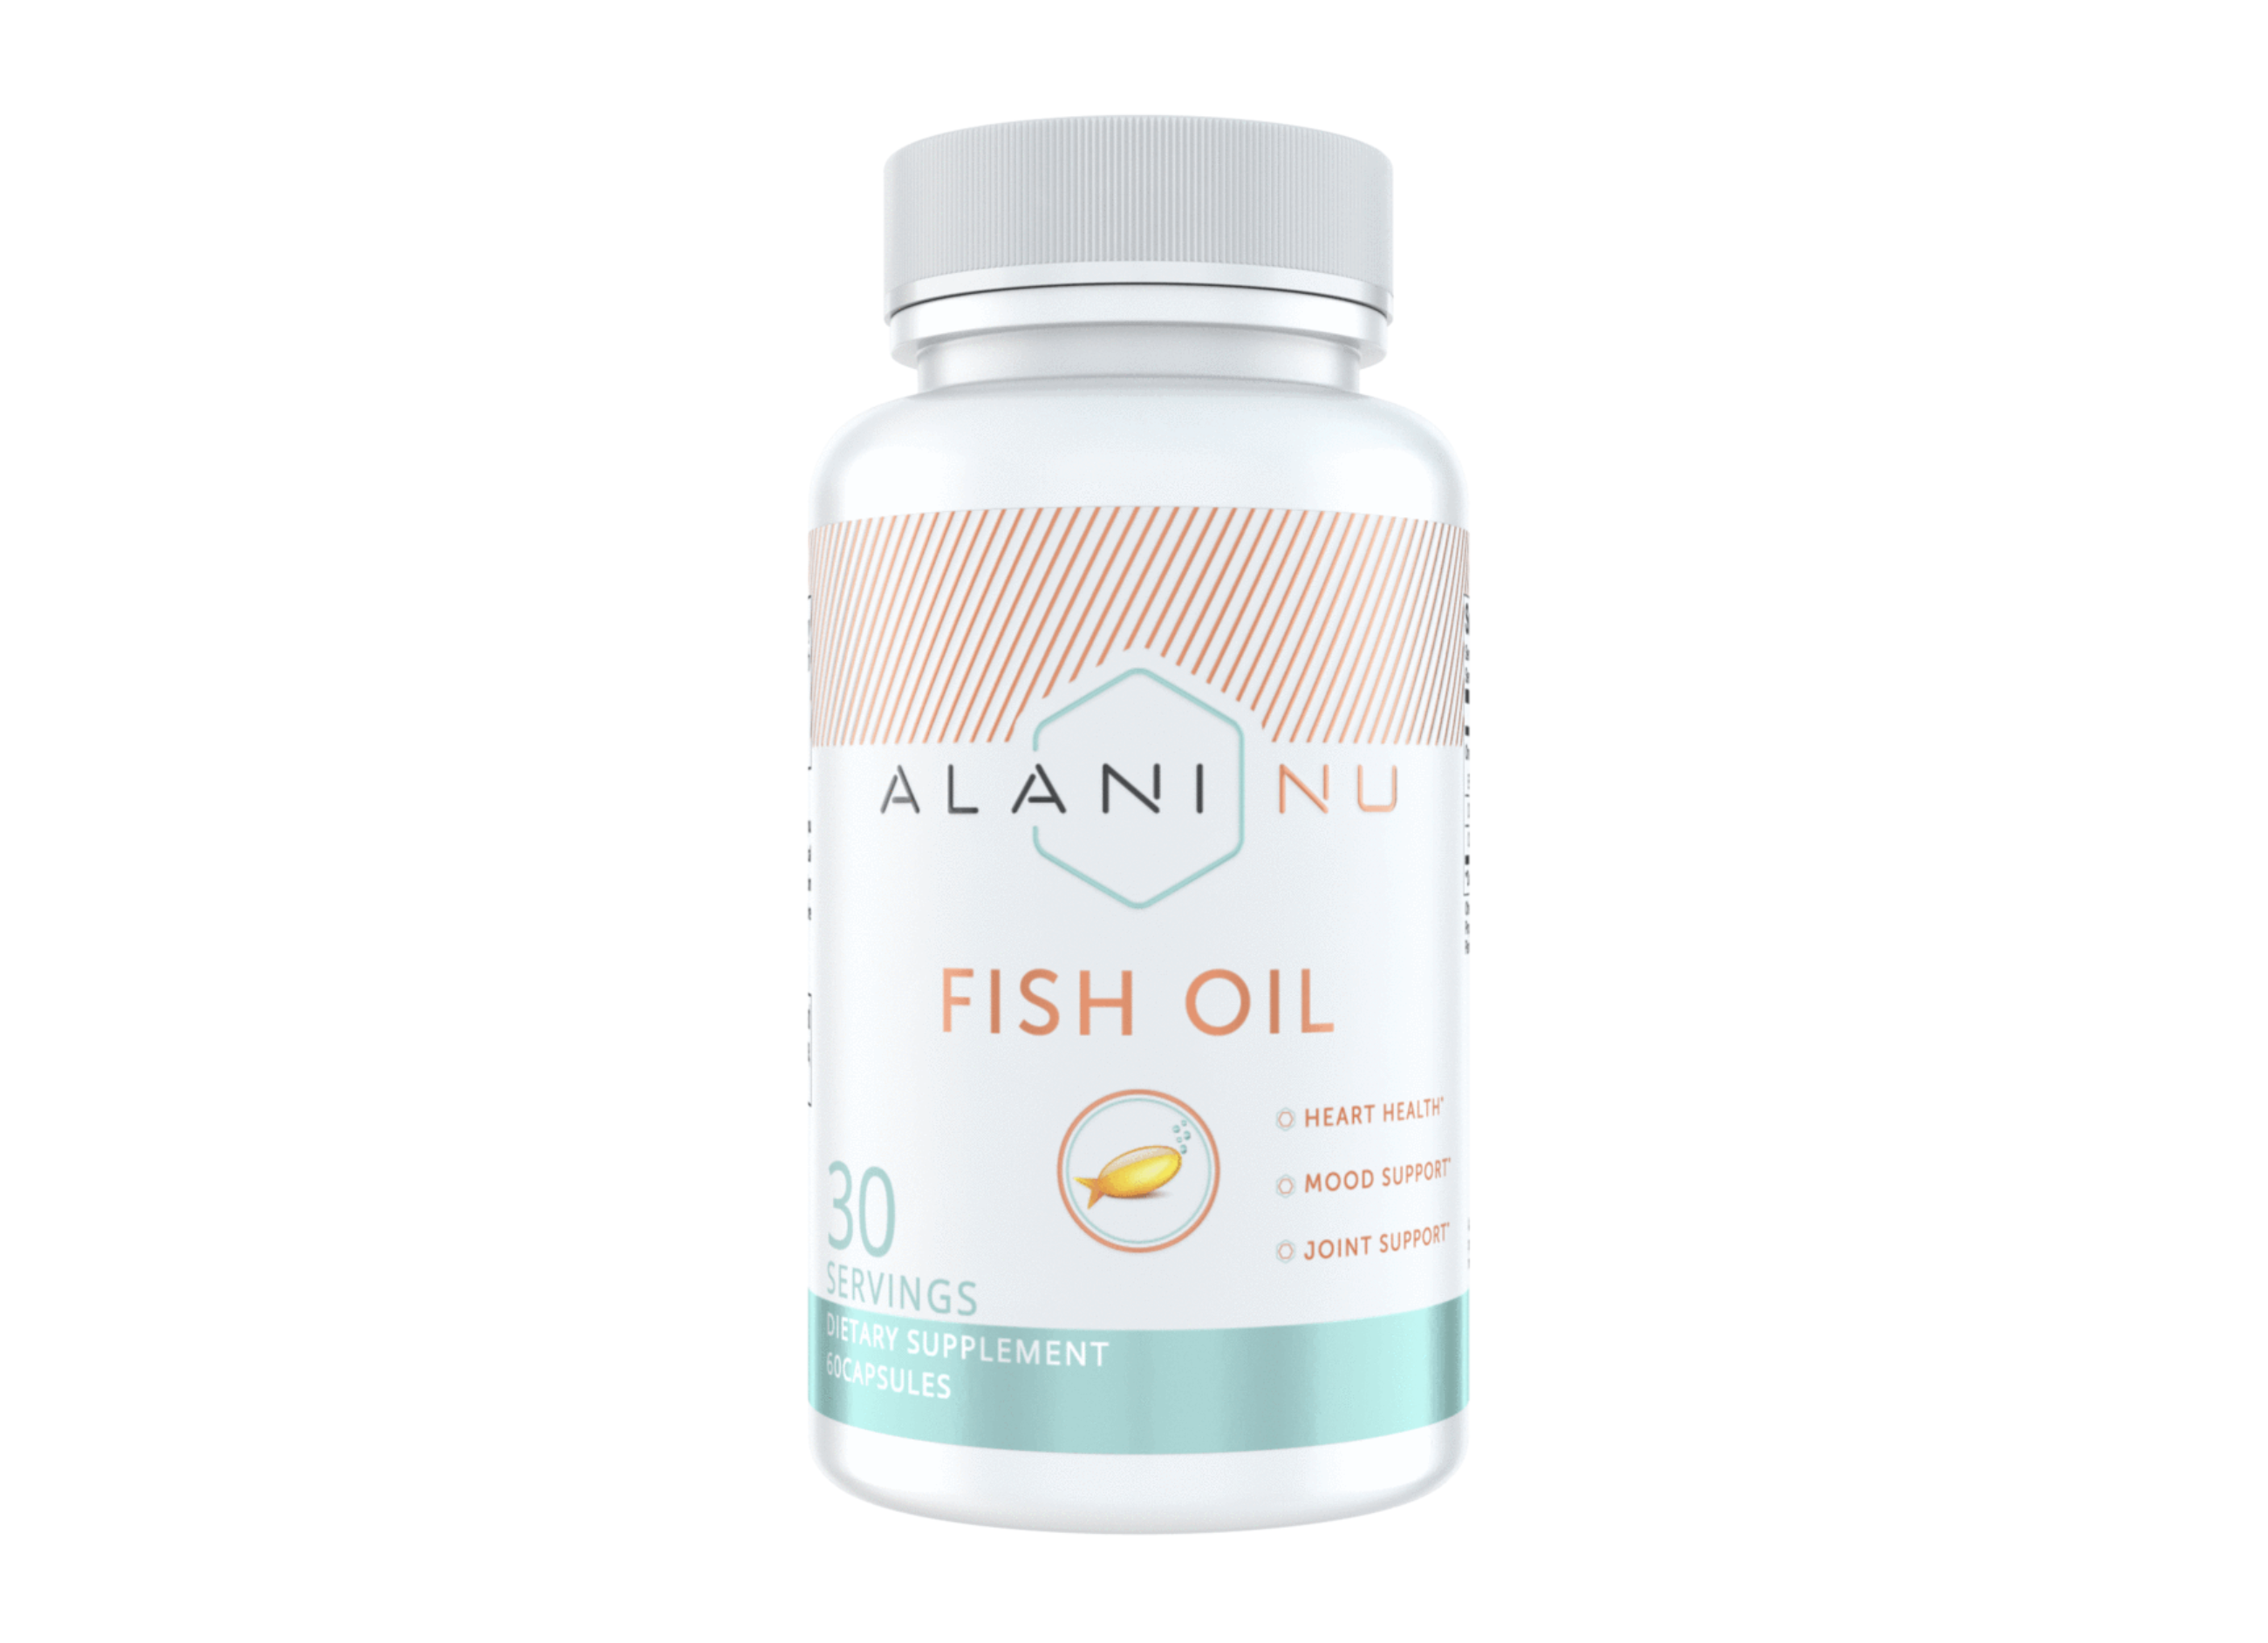 Alani Nu Fish Oil – General Health – Professional Supplements & Protein From A-list Nutrition